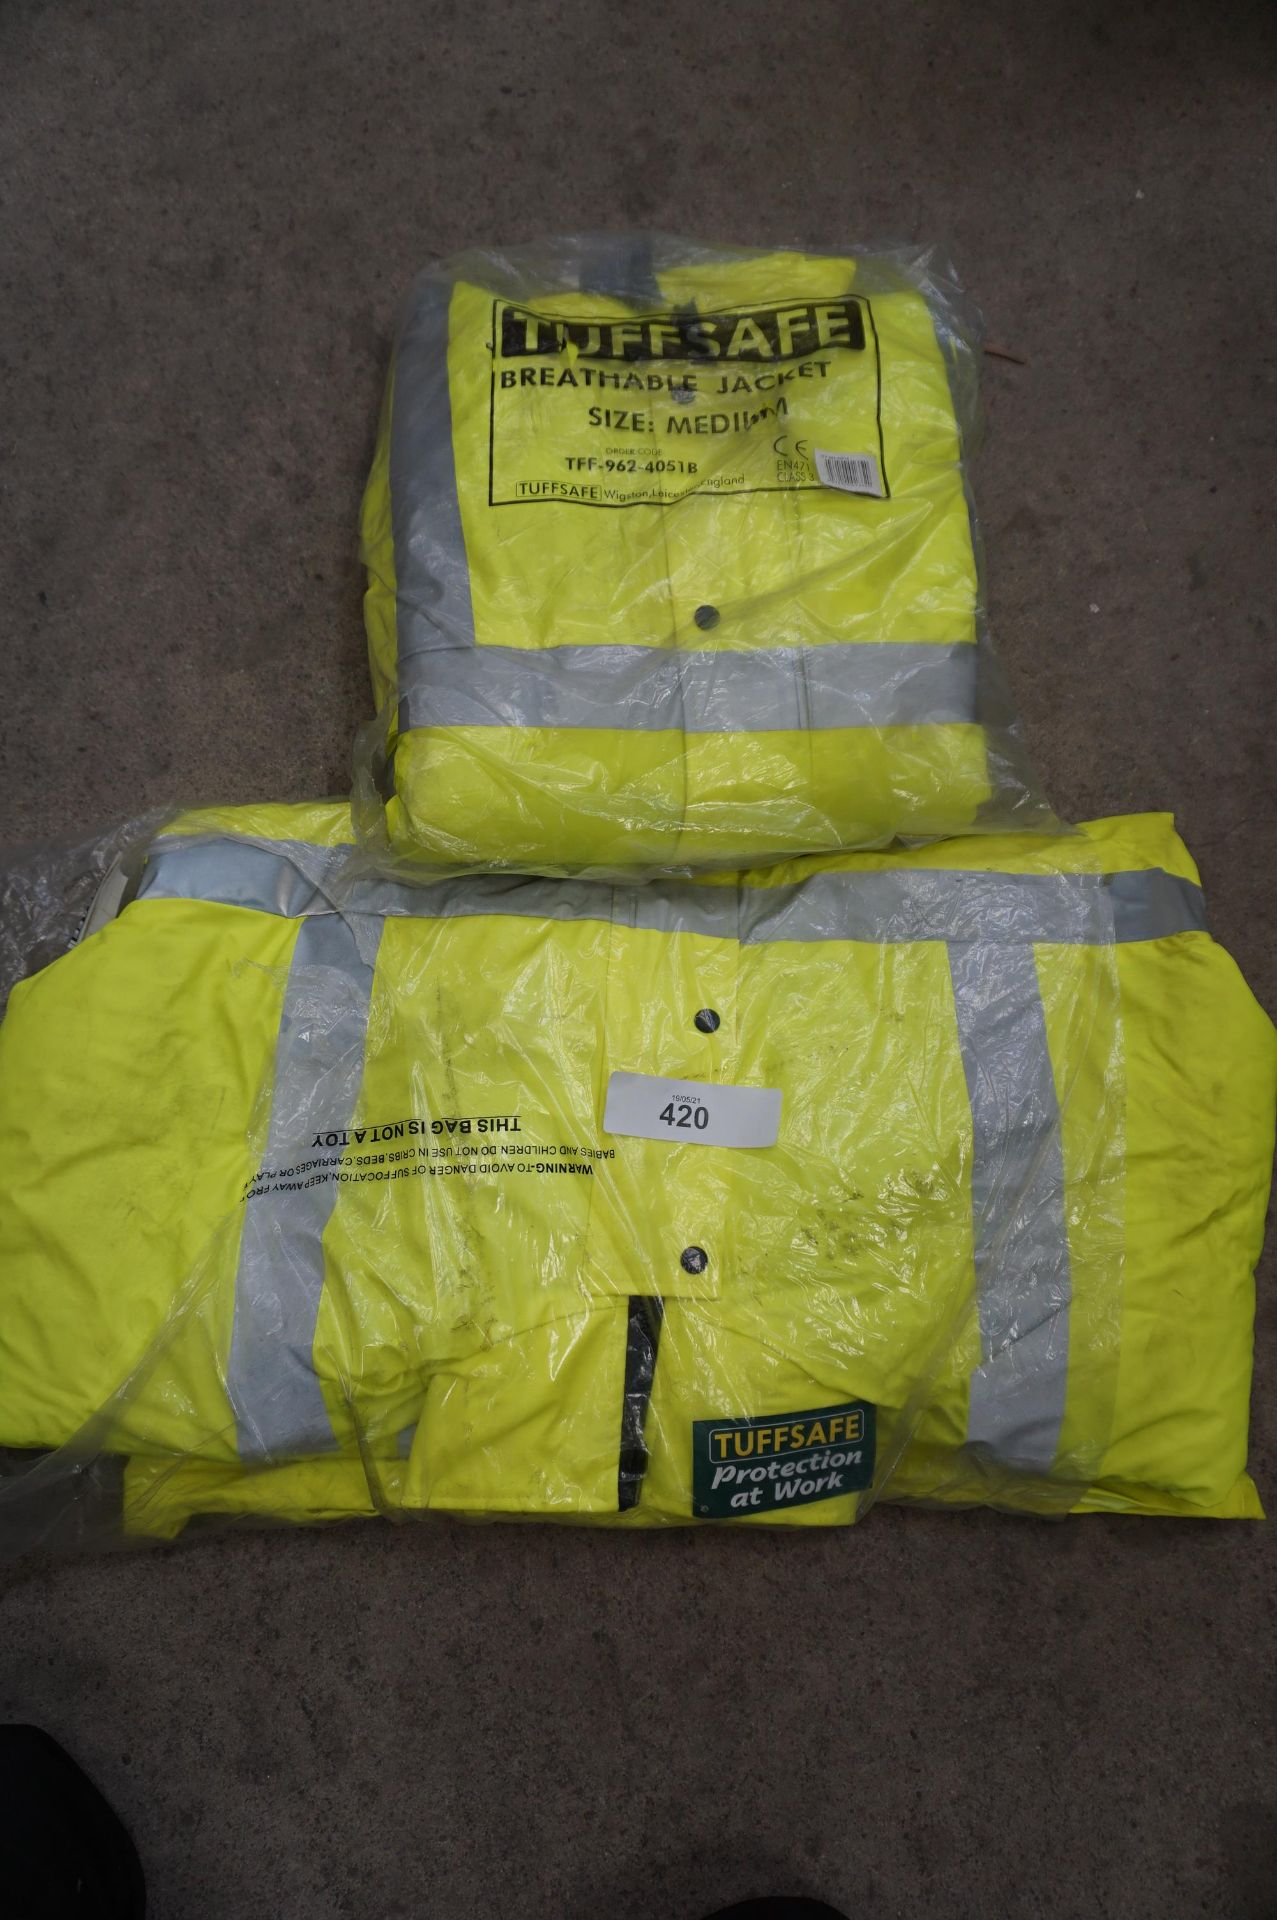 7 x assorted Hi-Visibility clothing including 2 x Tuffsafe breathable jackets,,, size M, 1 x Bally - Image 8 of 8